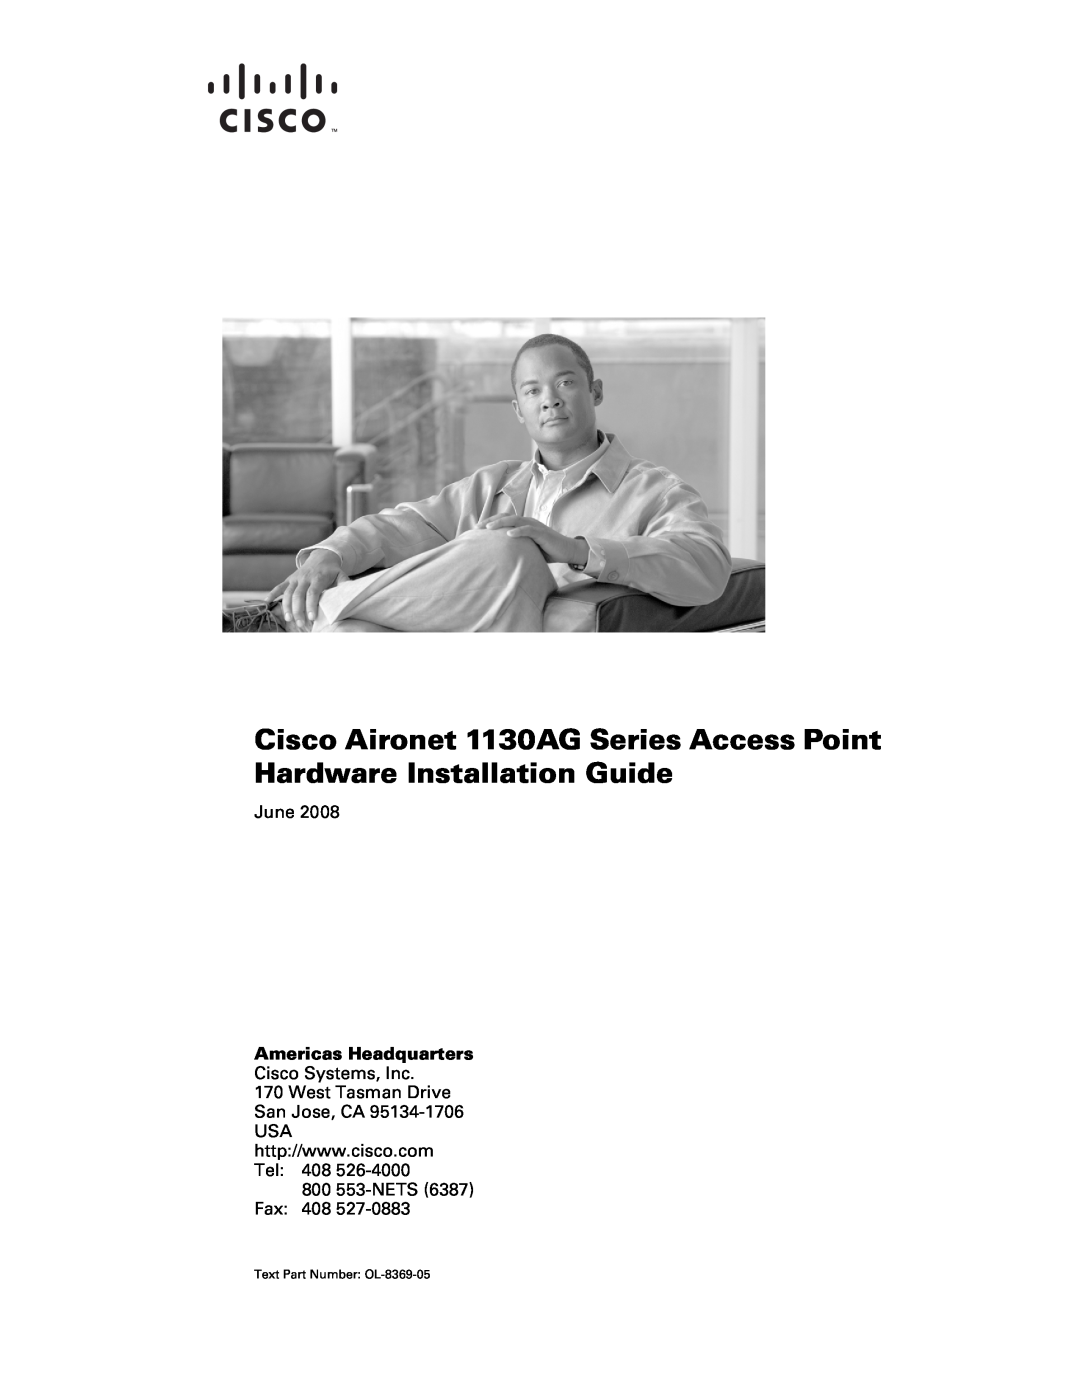 Cisco Systems manual Cisco Aironet 1130AG Series Access Point Hardware Installation Guide, June, Americas Headquarters 